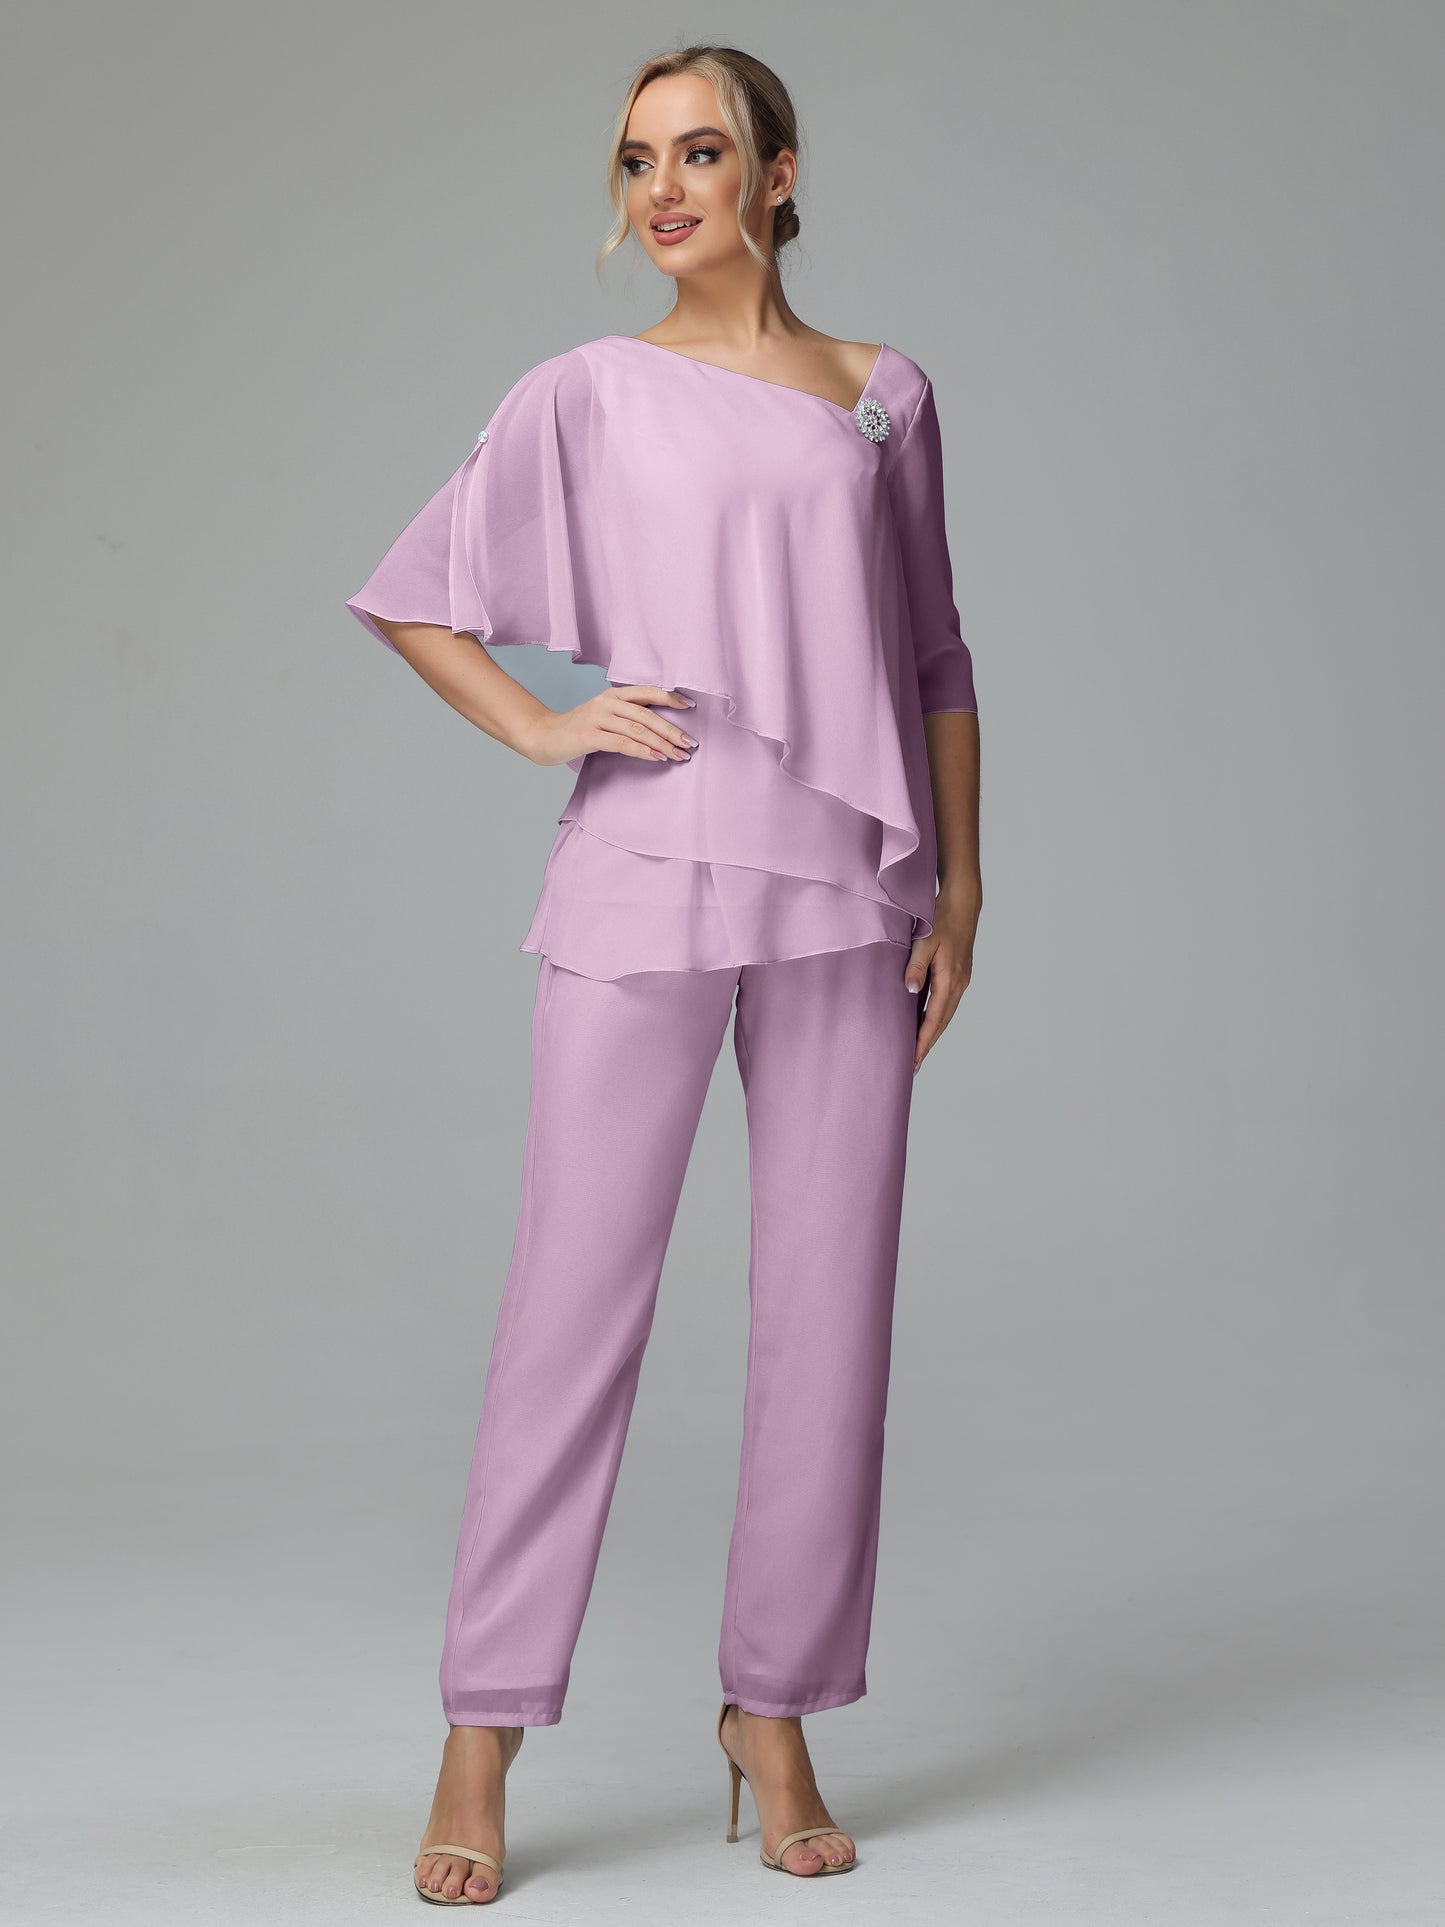 Half Sleeves Chiffon Mother of the Bride Dress Pant Suits With Beading